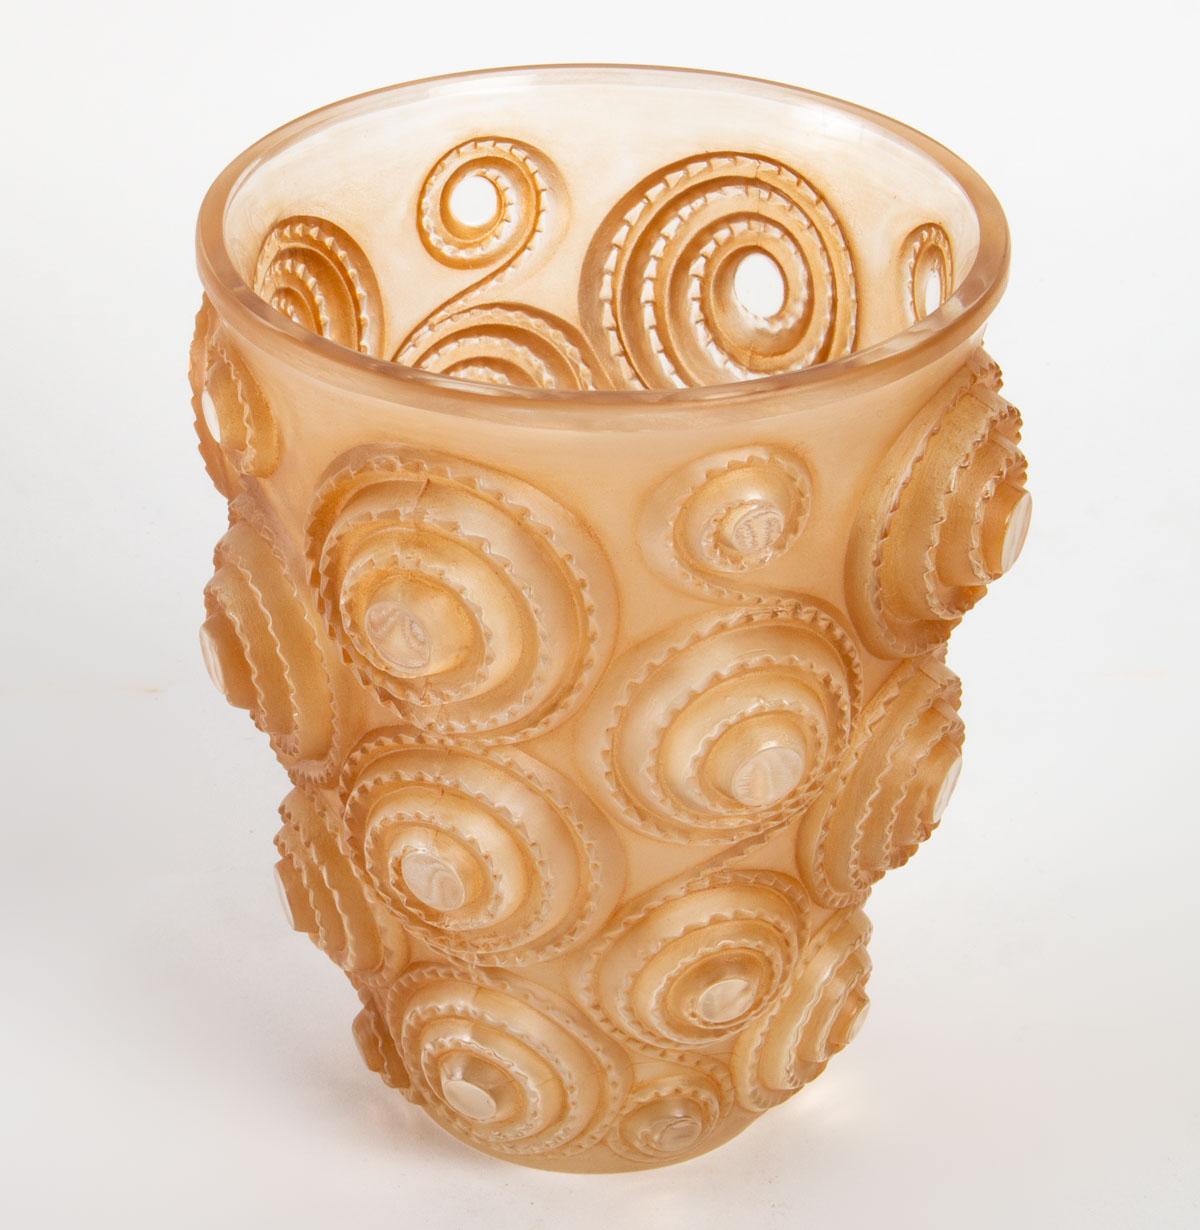 French 1930 René Lalique Spirales Vase in Glass with Sepia Patina Art Deco